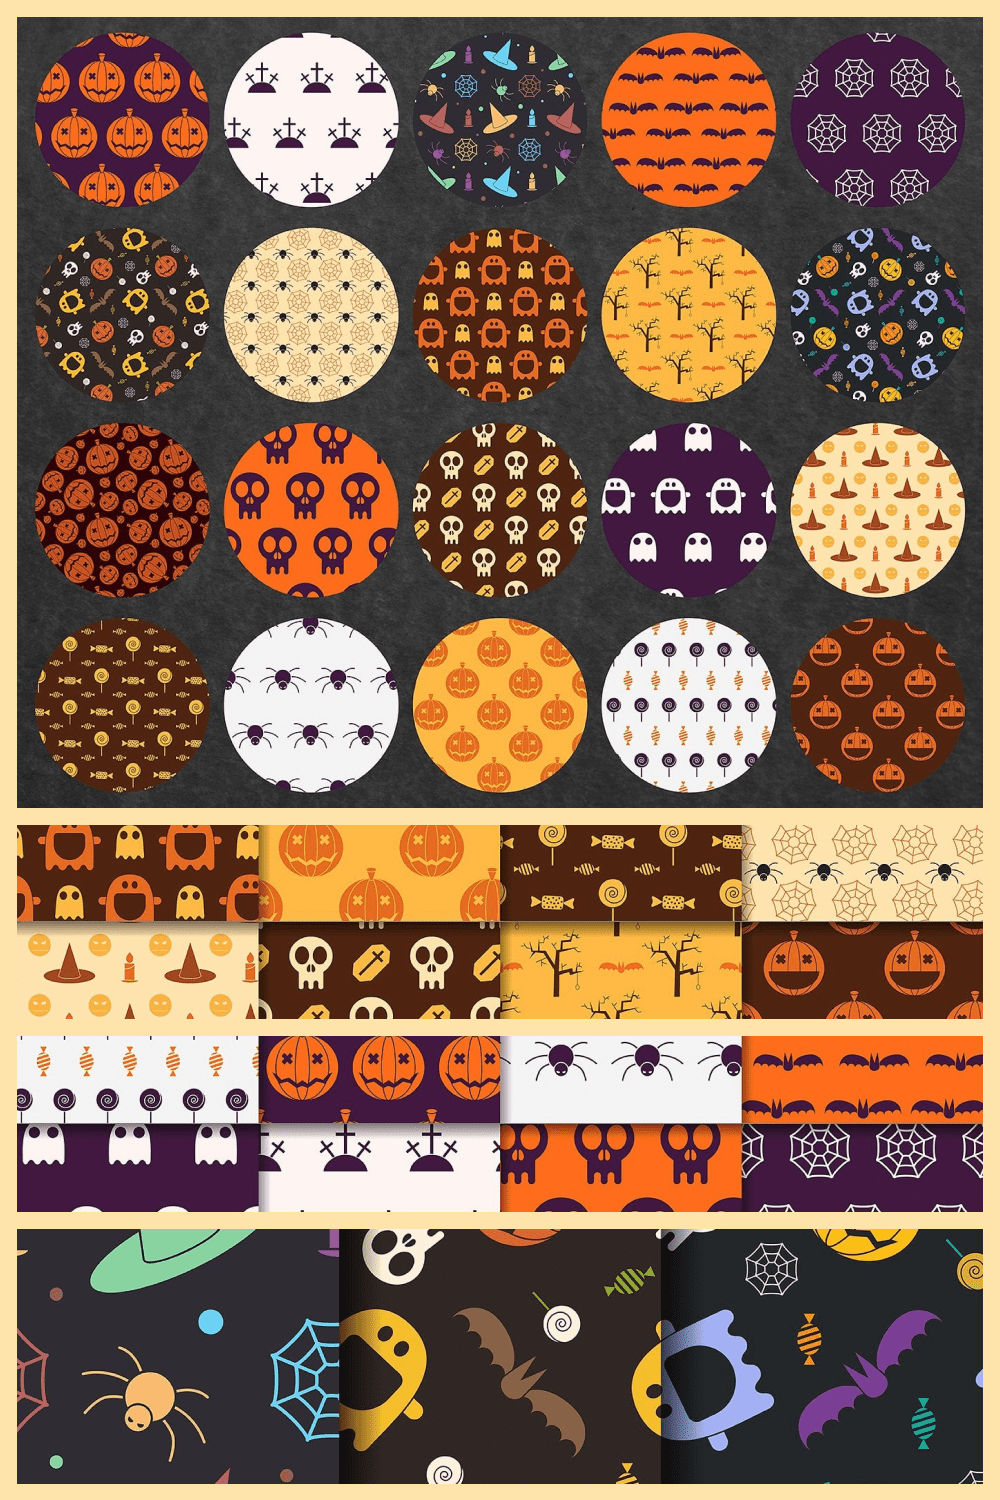 Oh, those cute pumpkins and spiders in different color palettes.